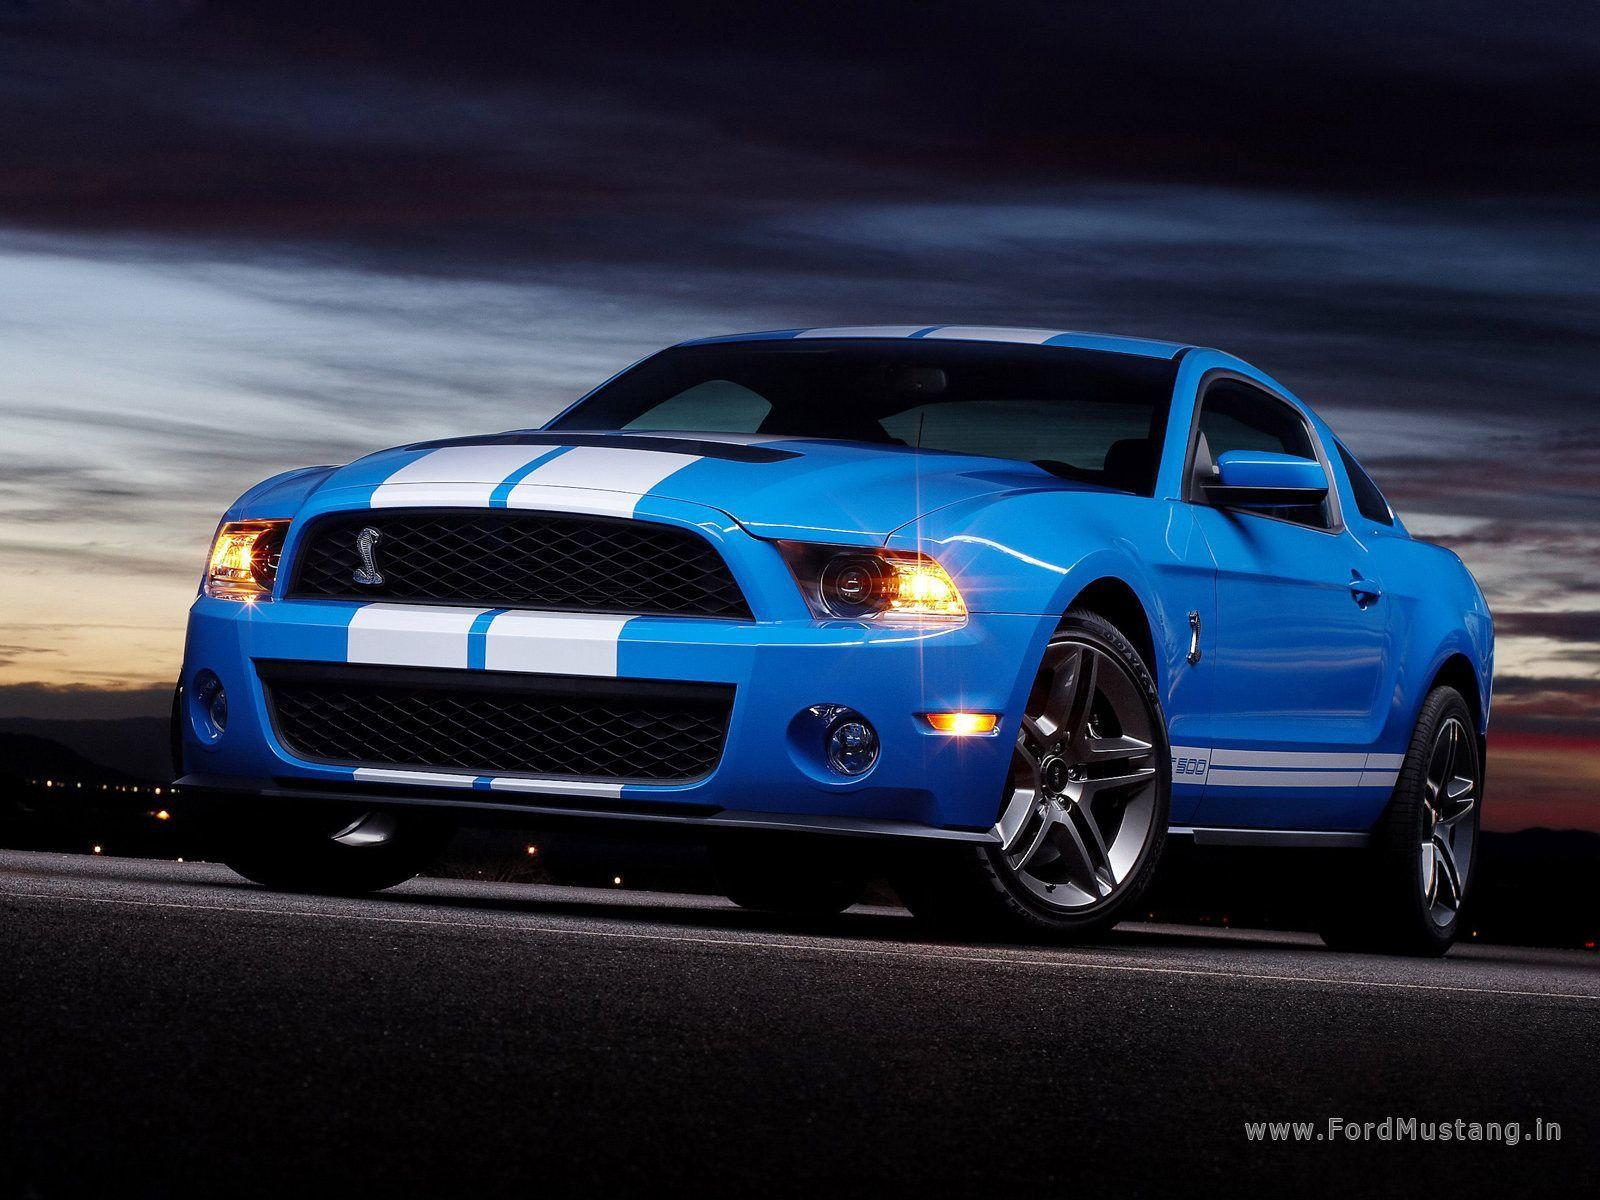 Wallpaper Mustang Shelby Gt500 , Download 4K Wallpaper For Free